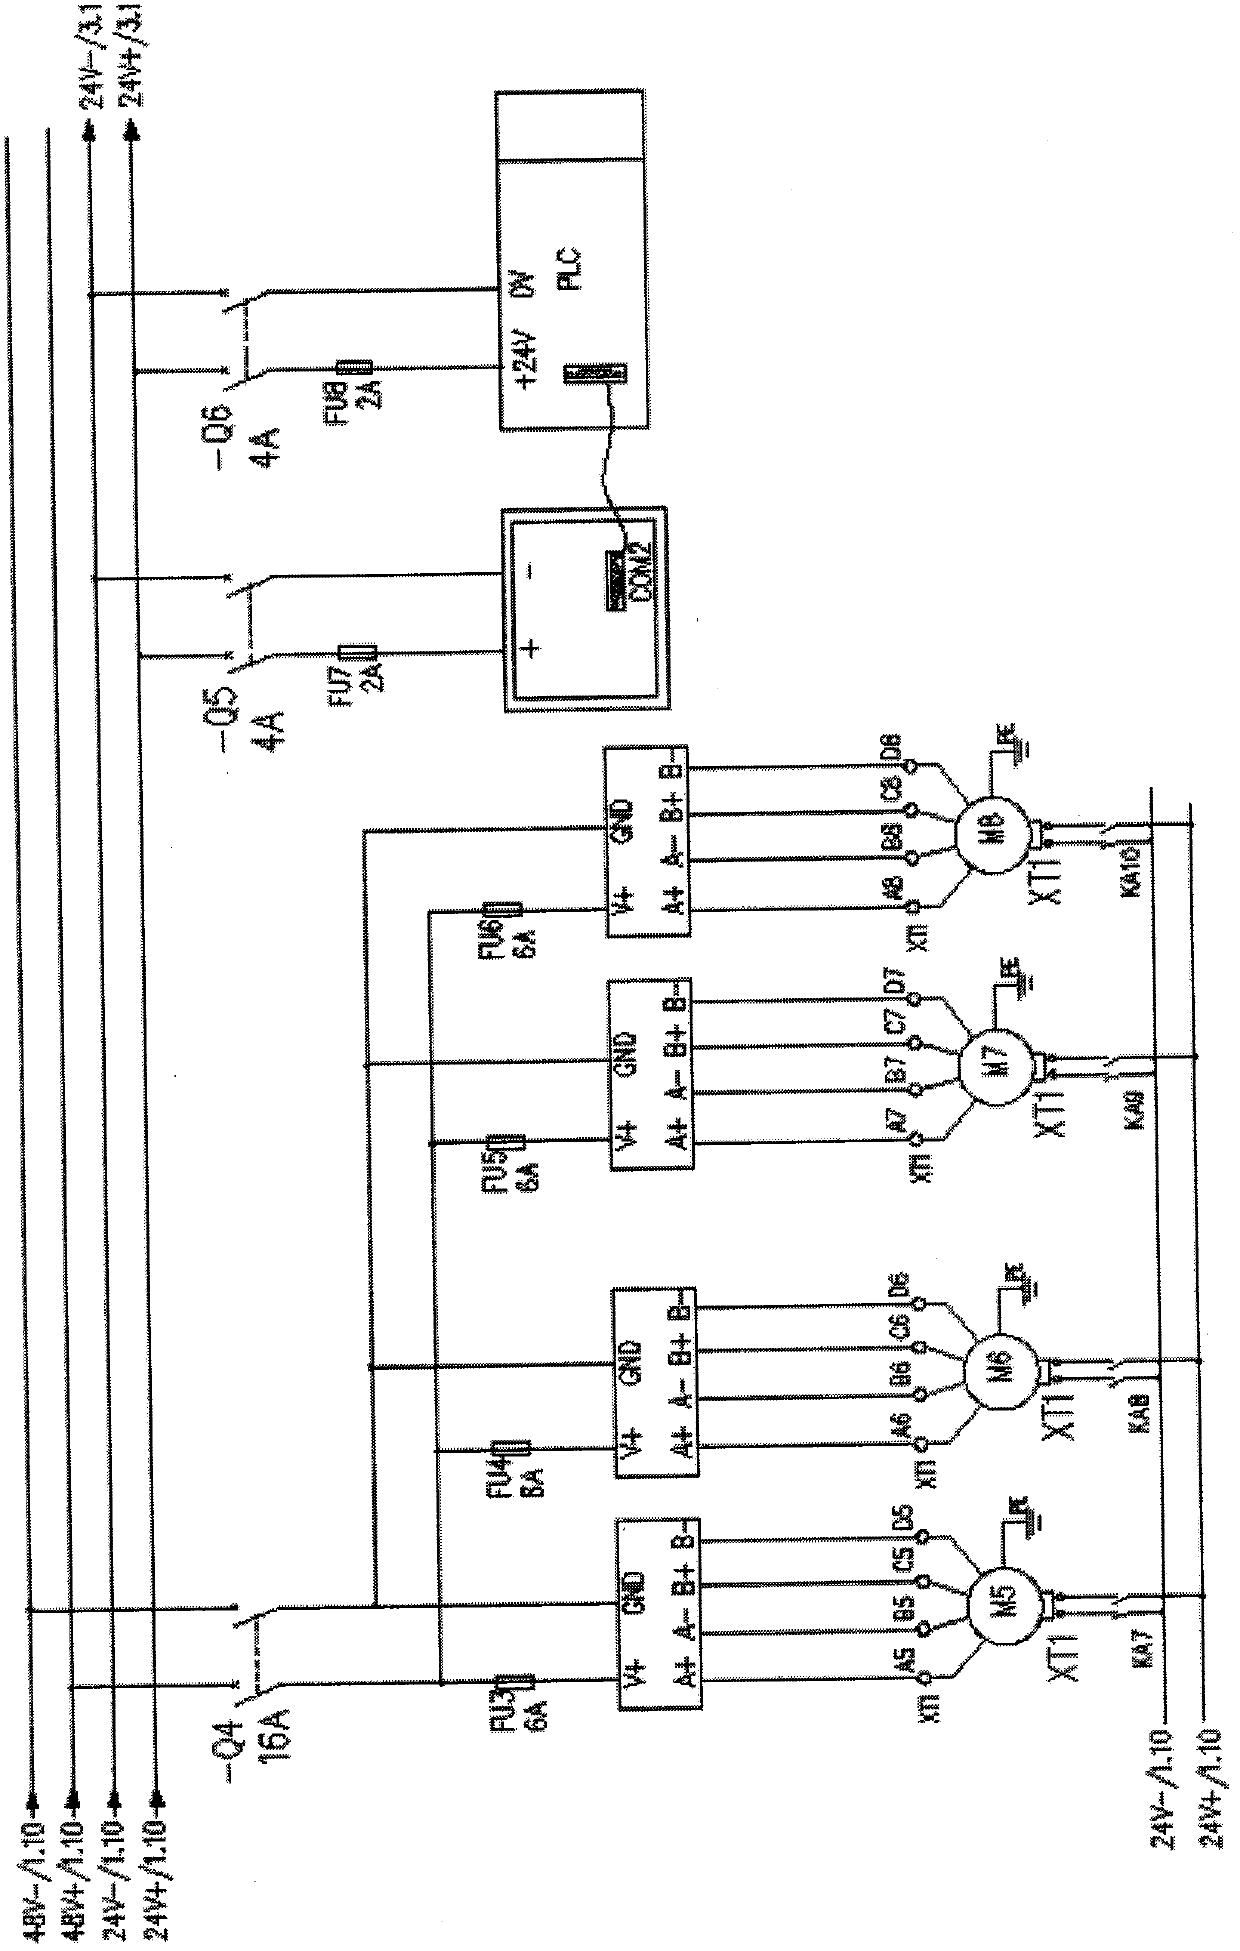 Medical vehicle electrical control system